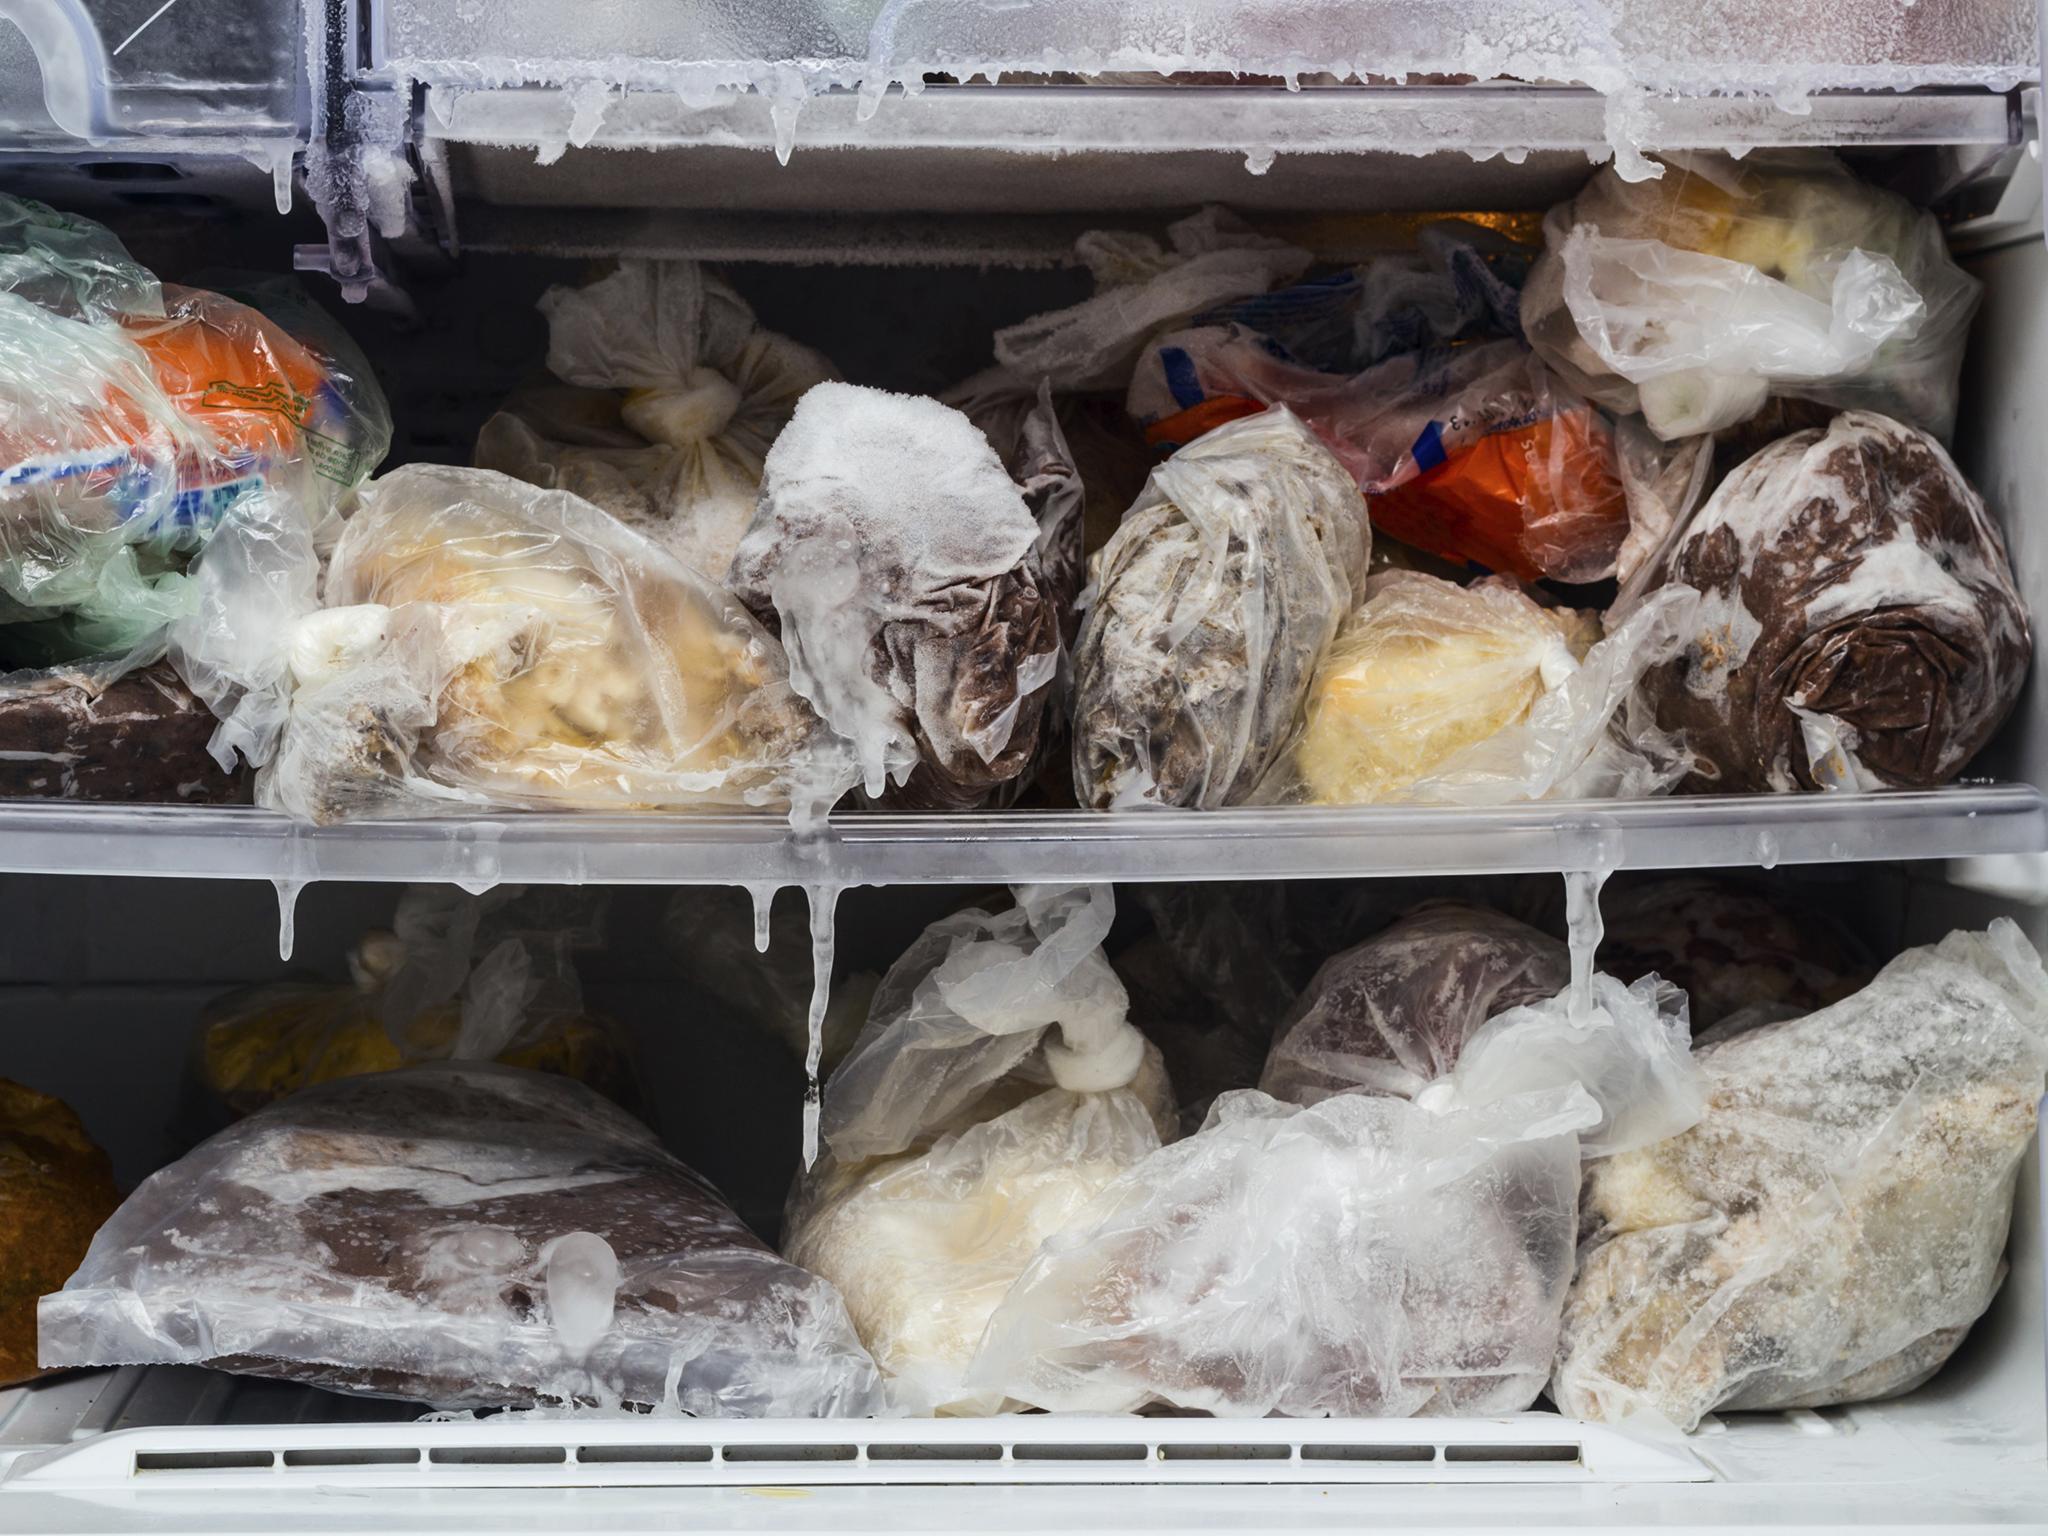 Half of the seven million tonnes of food thrown away in the UK each year could have been eaten